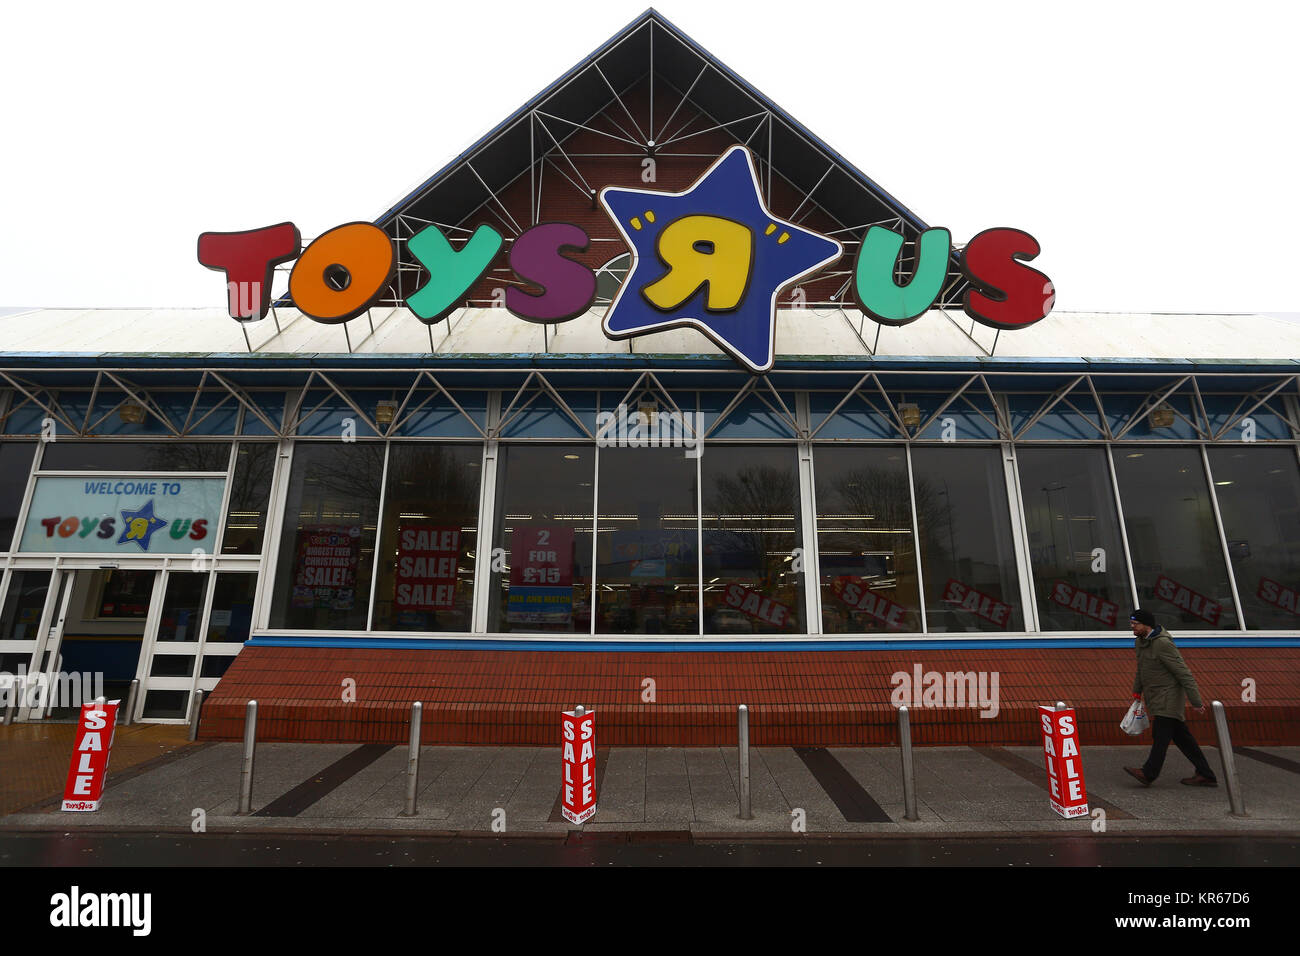 Stockport, UK. 19th Dec, 2017. A general view of the Stockport Peel Centre branch of Toys R US, Greater Manchester, UK. Credit: Philip Oldham/Alamy Live News. Stock Photo